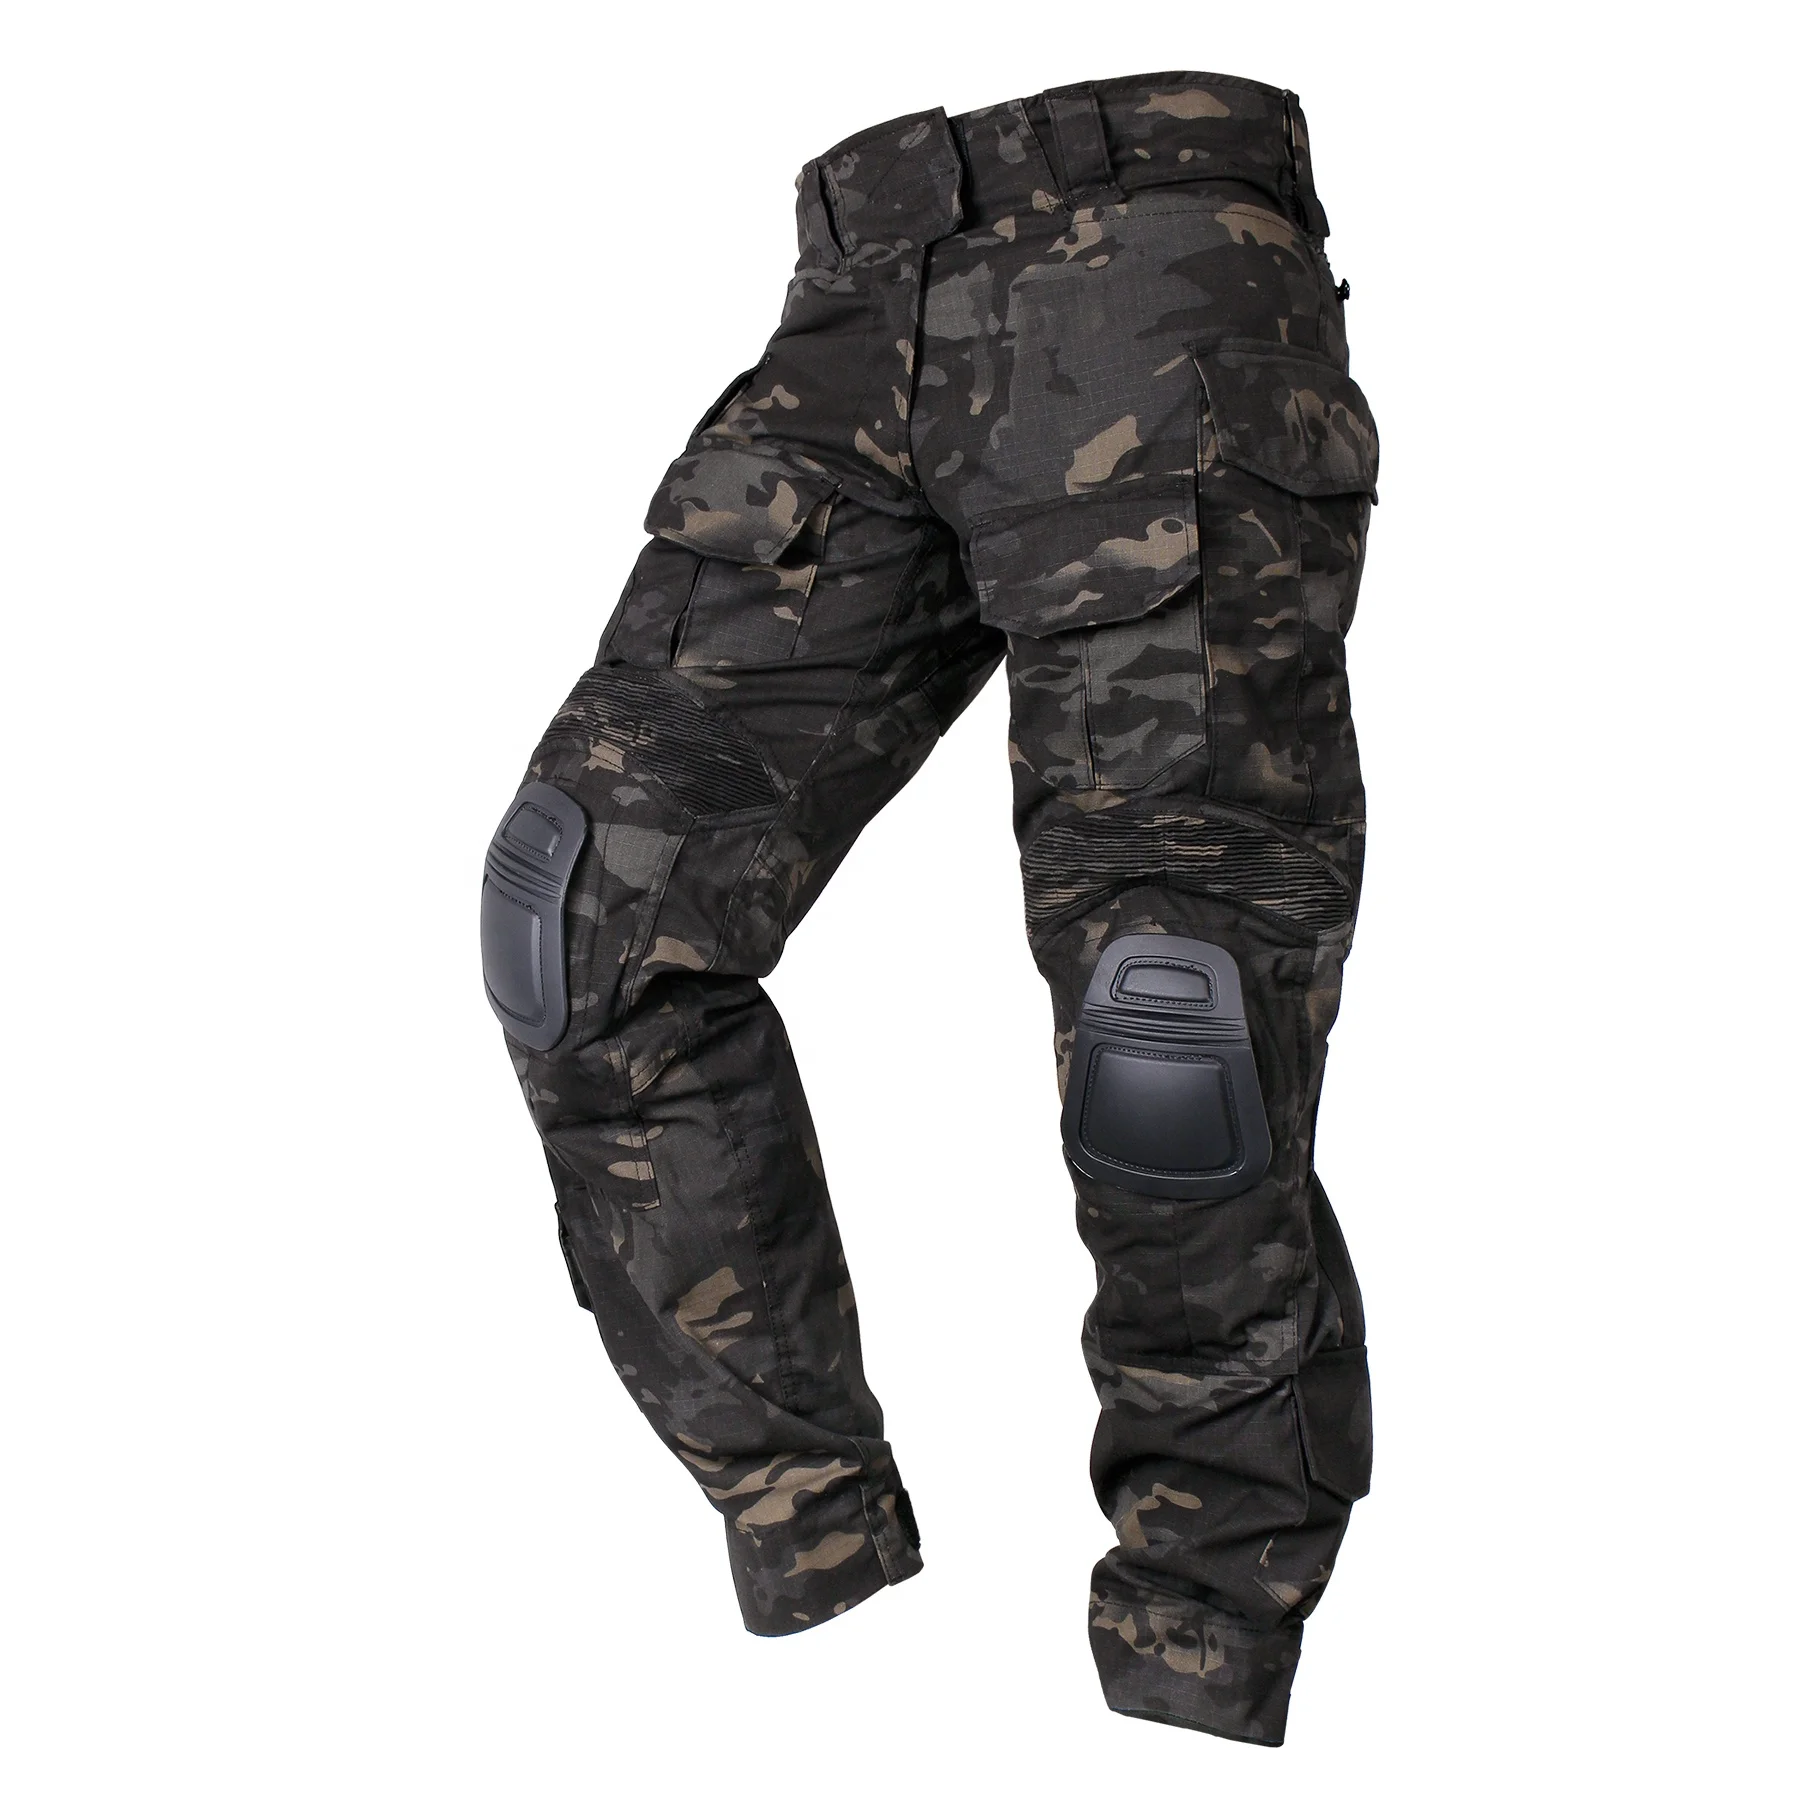 

IDOGEAR Men G3 Multicam Hunting Paintball Tactical Outdoor Trousers Multi Pocket Camouflage Combat Pants with Knee Pads